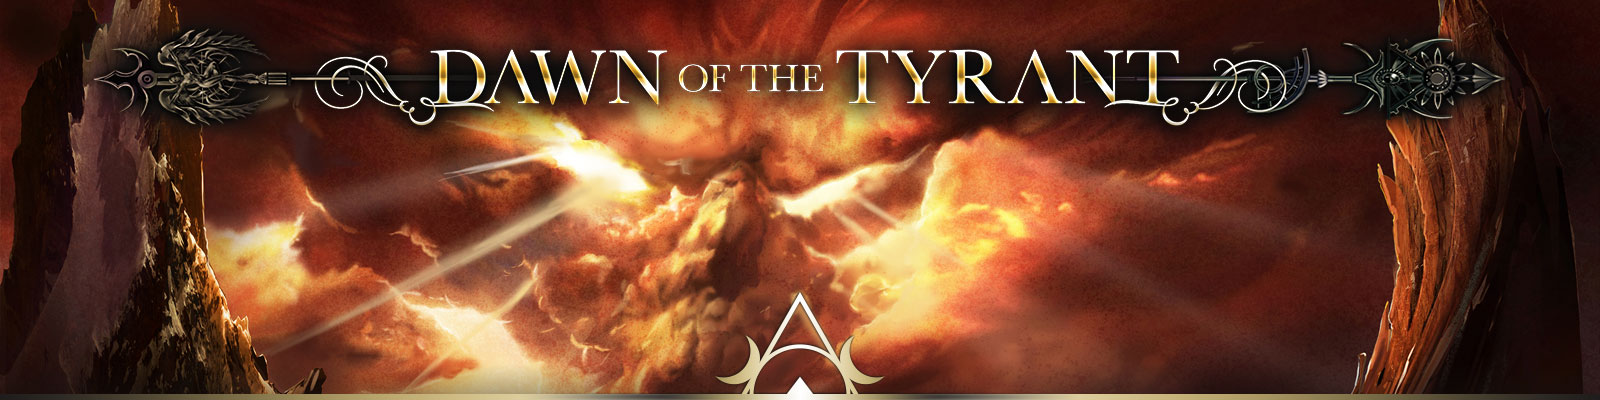 Dawn of the Tyrant